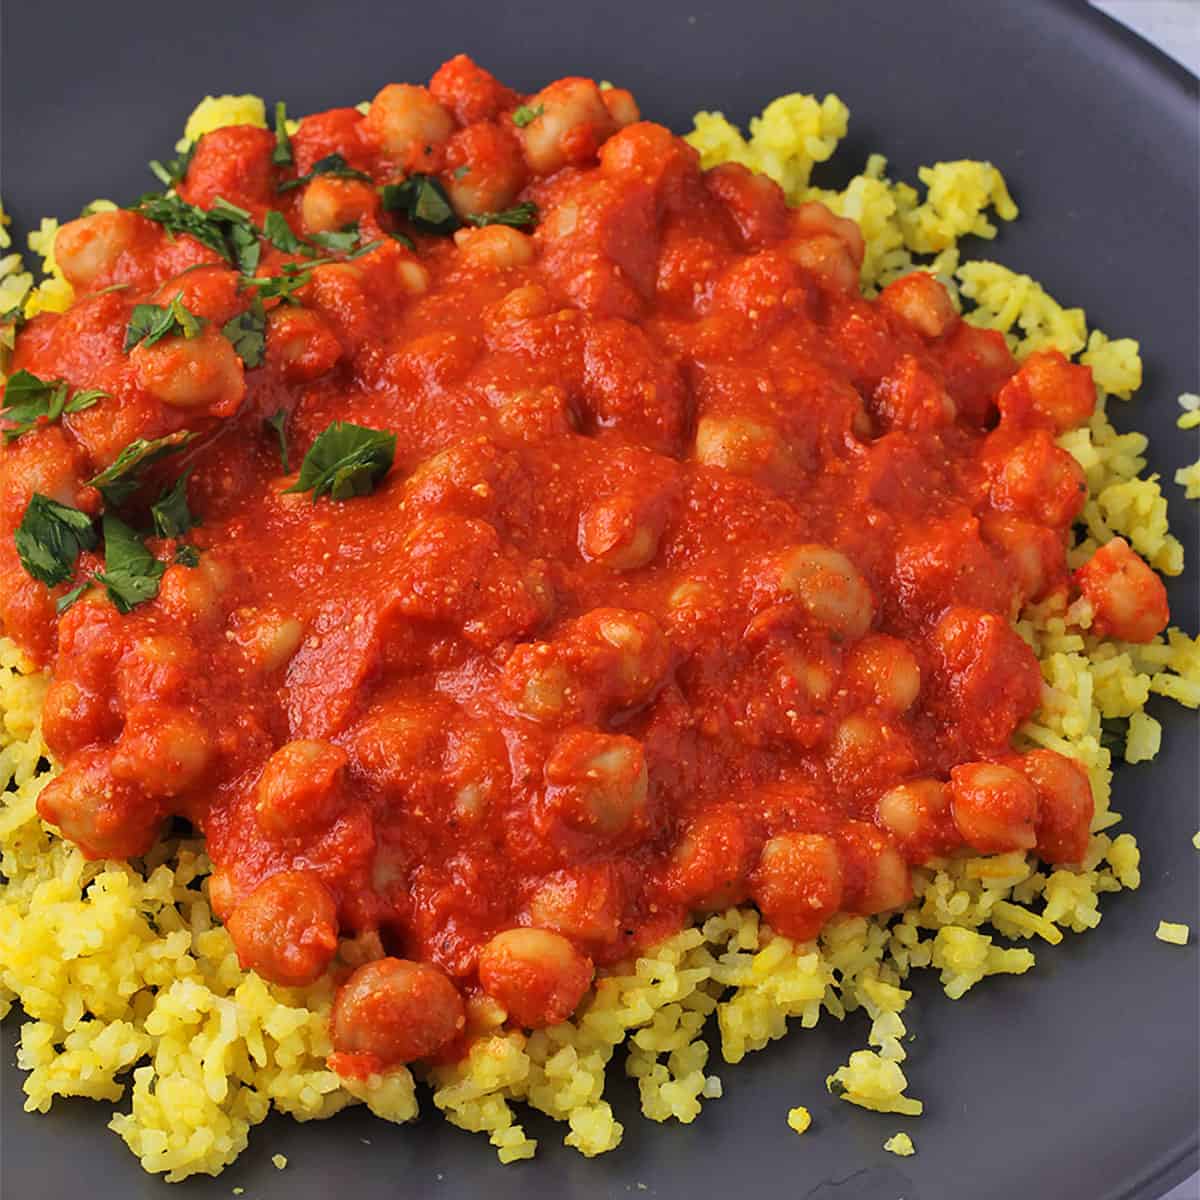 Chickpeas in red pepper sauce romesco sauce over yellow rice with chopped parsley on black plate